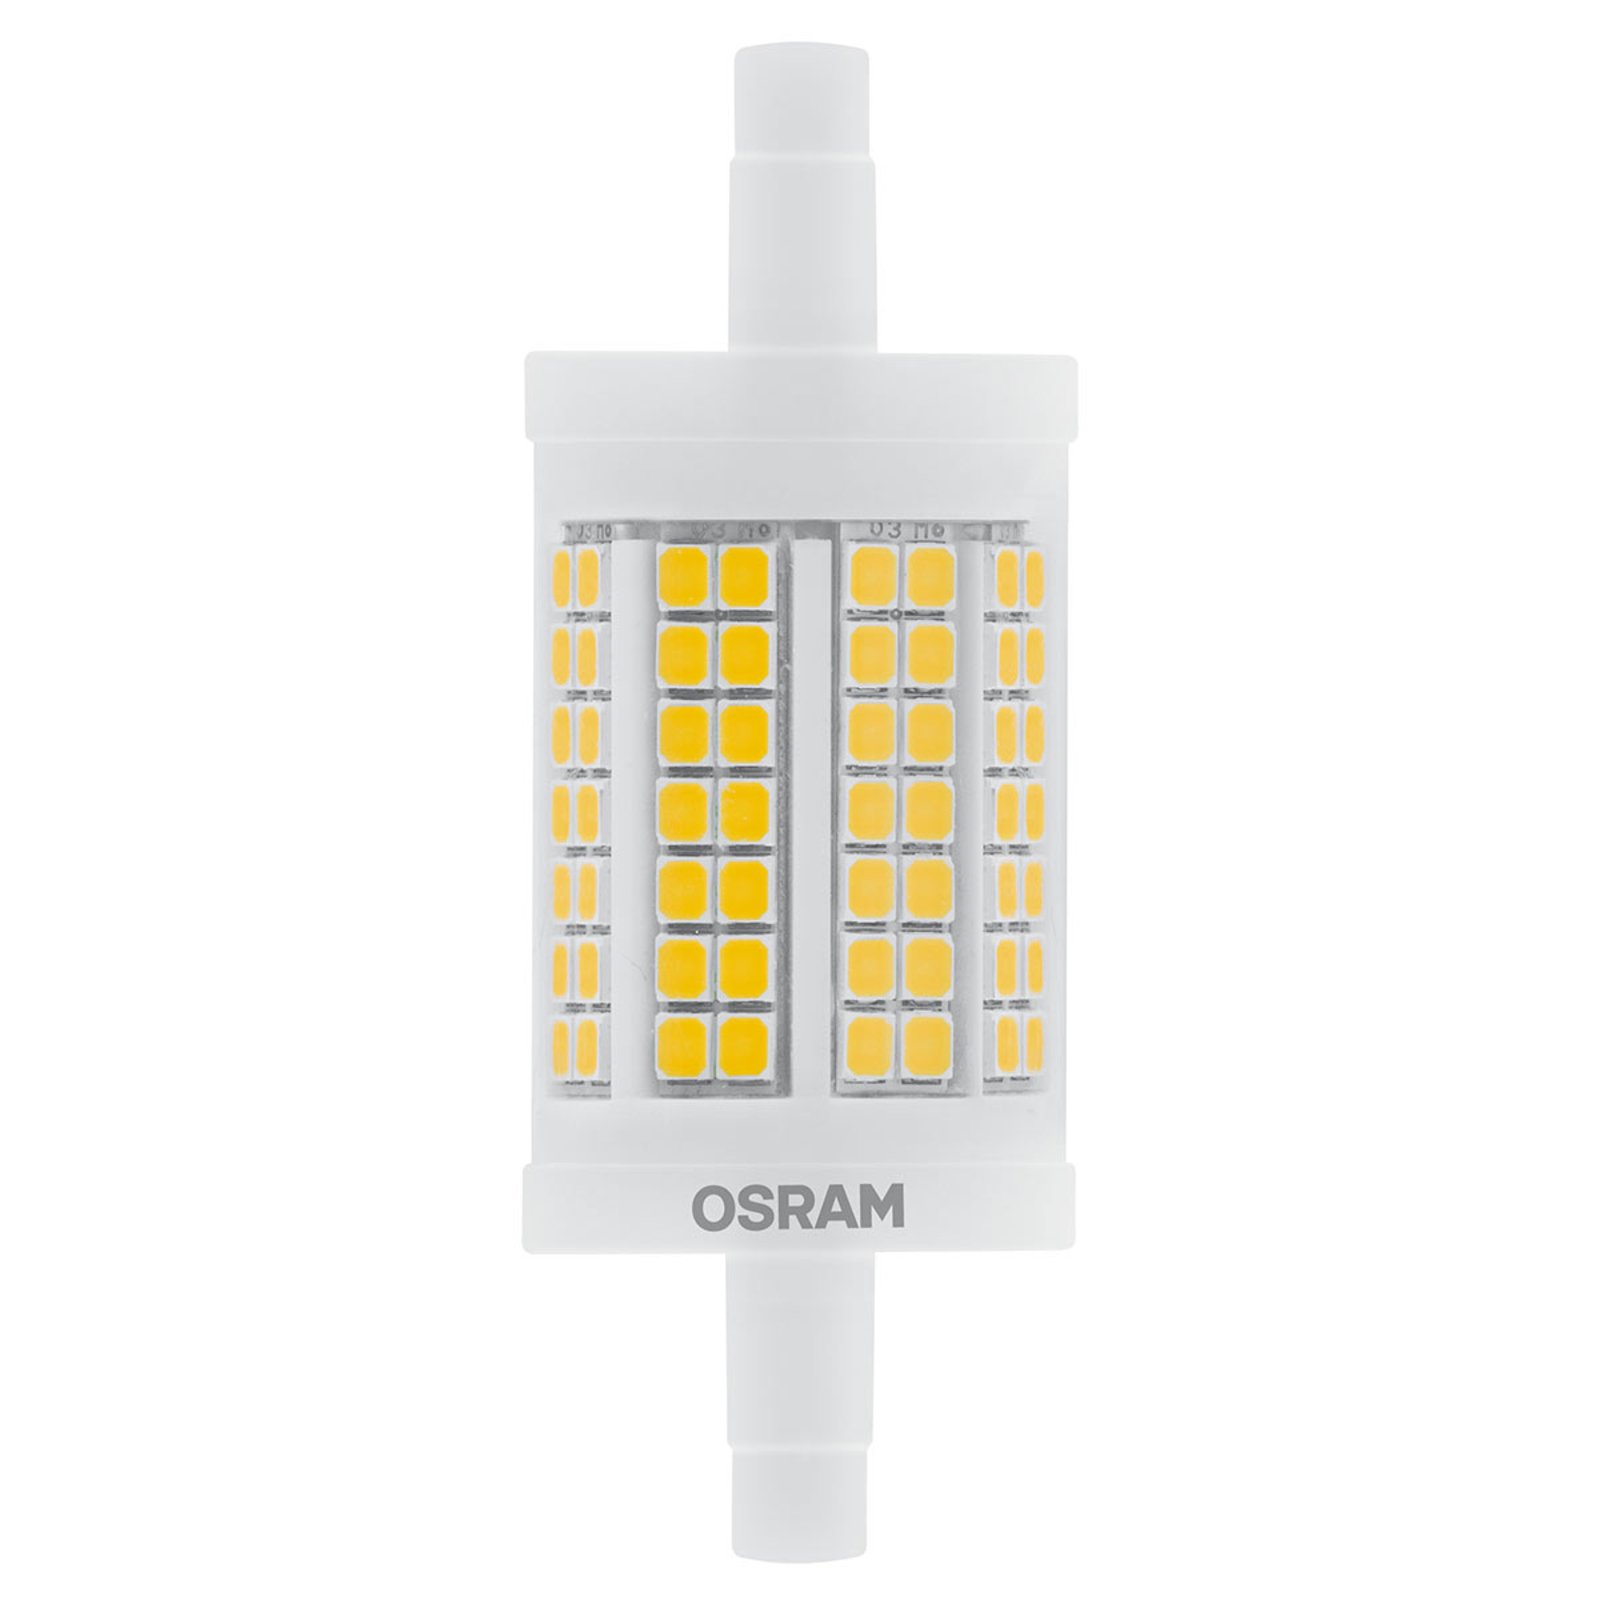 OSRAM LED staaflamp R7s 11,5W warmwit, 1.521 lm